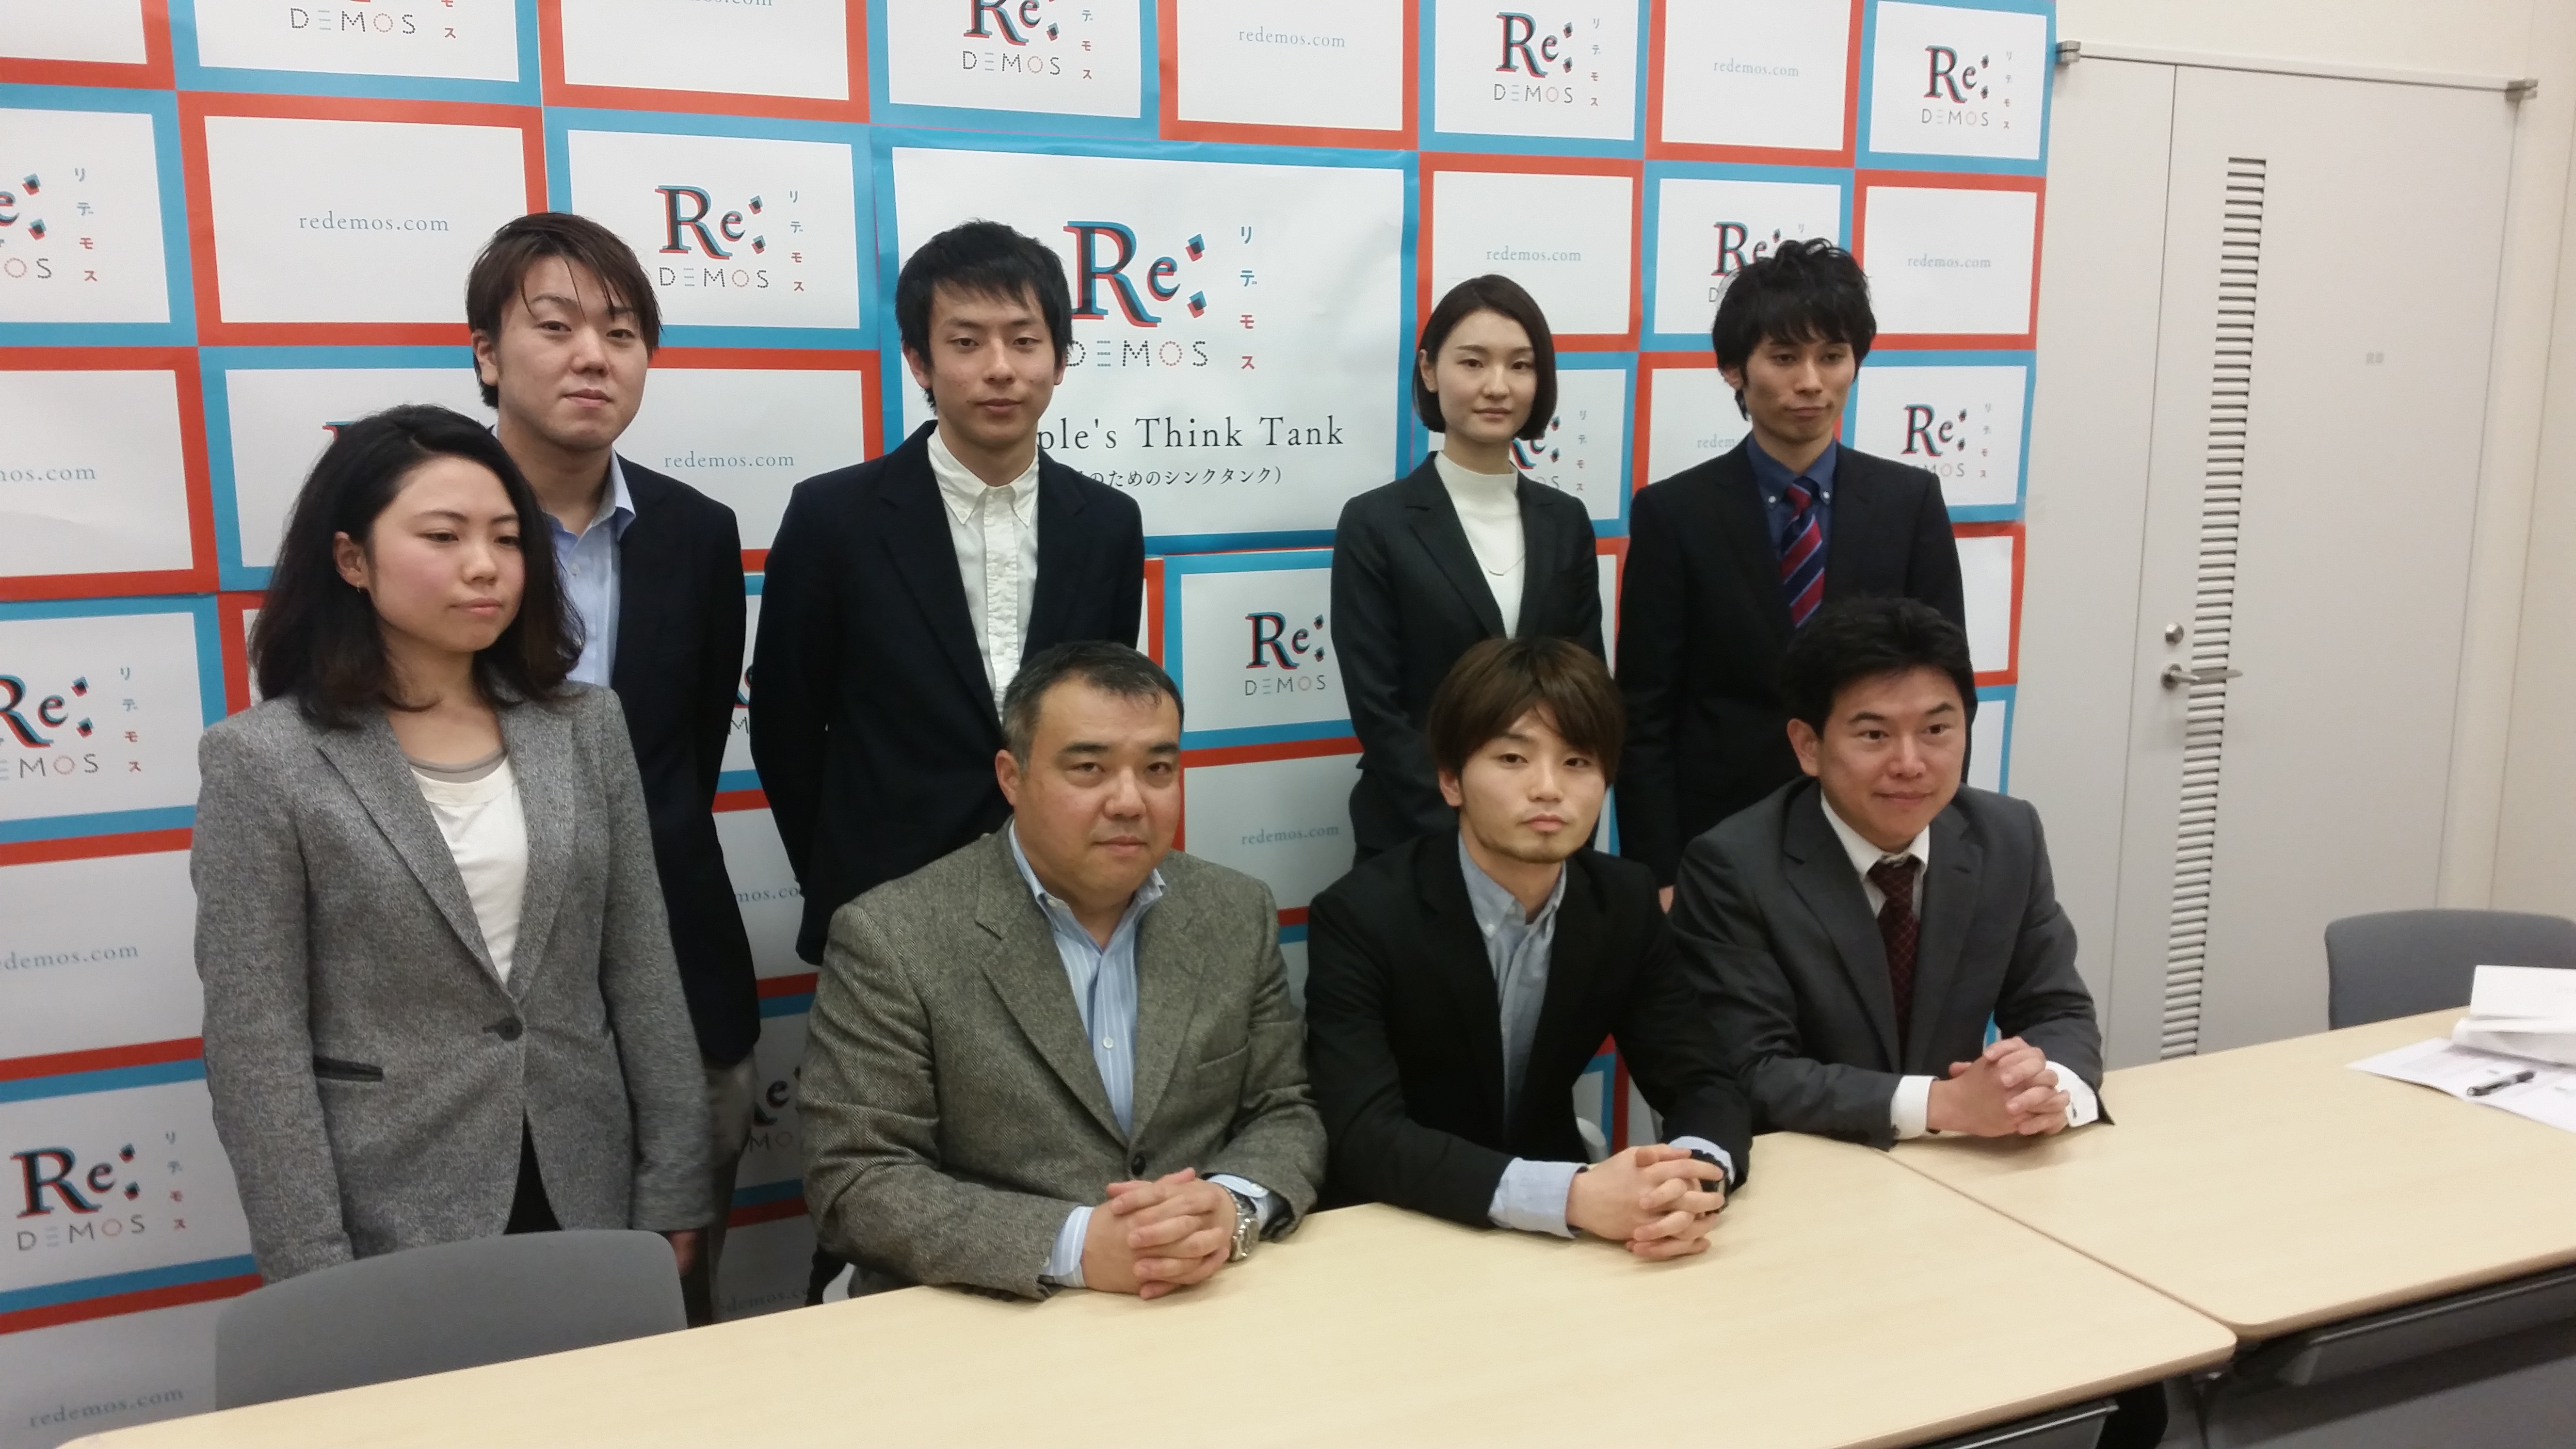 Aki Okuda (seated, center) and other members of Students Emergency Action for Liberal Democracy (SEALDs) announce the launch of a new think tank, ReDemos, in Tokyo on Monday. Seated at left is Koichi Nakano, a political science professor at Sophia University, and seated at right is attorney Takahisa Mizukami. | TOMOHIRO OSAKI